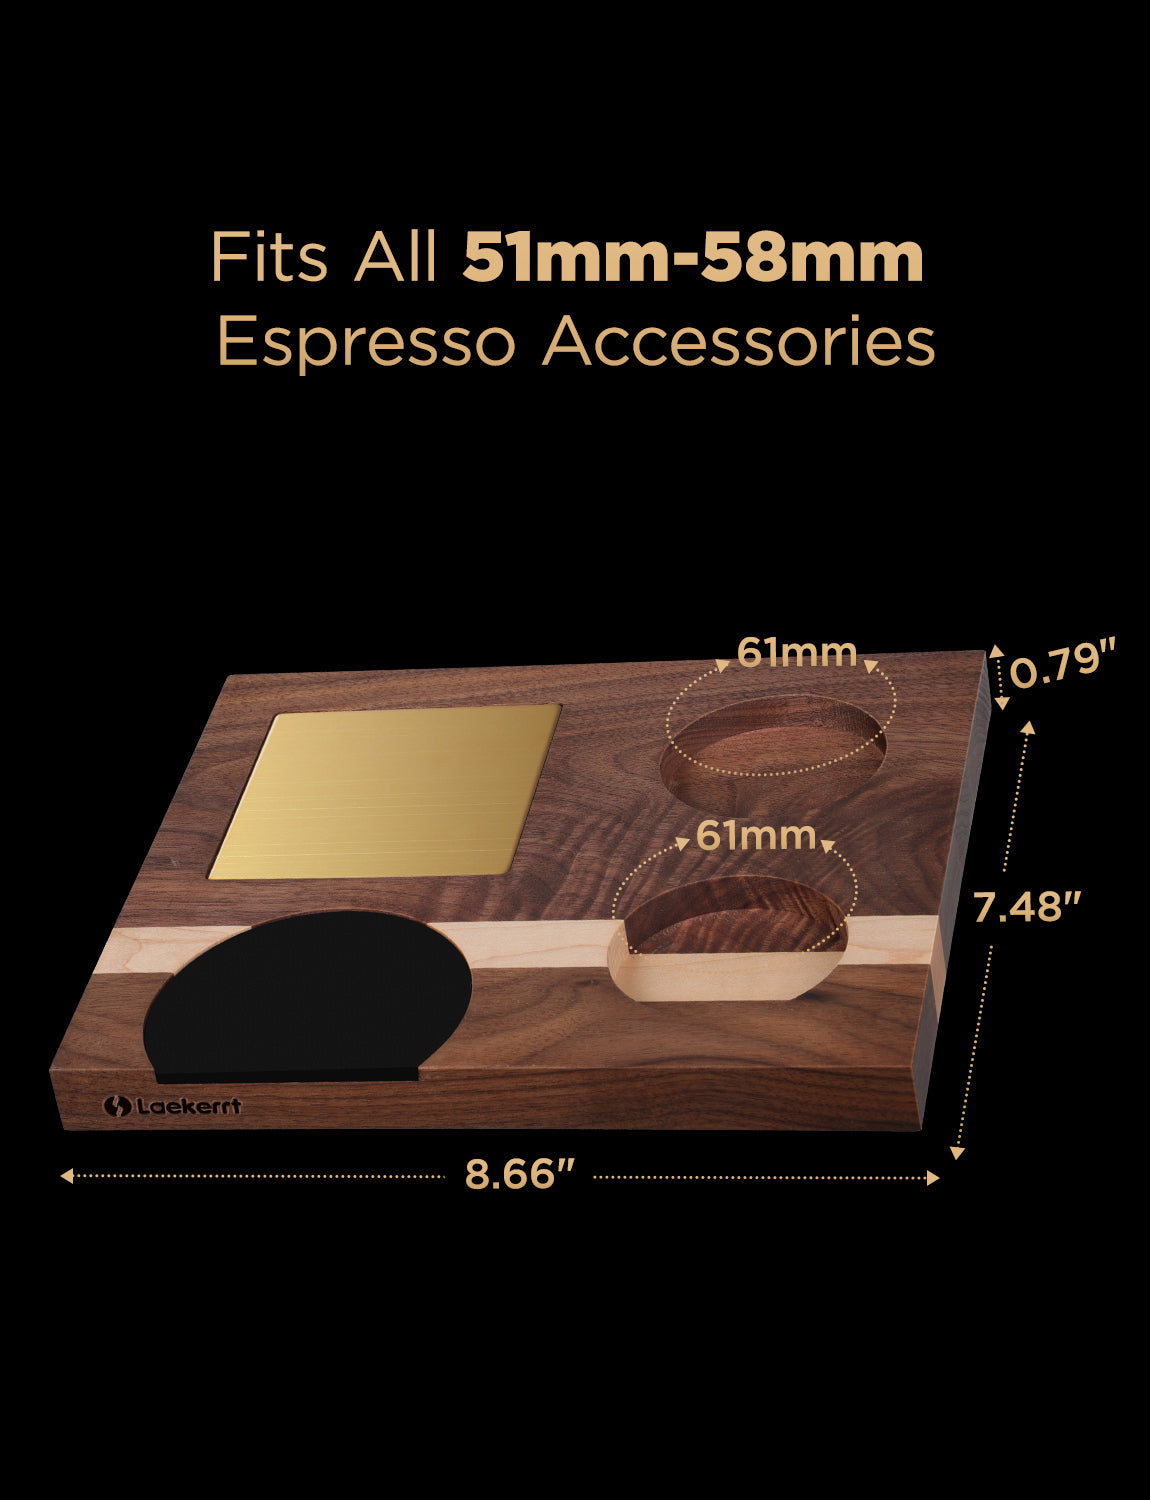 Laekerrt Espresso Tamping Station, Coffee Tamping Base, Natural Walnut Wood Coffee Station, Fits All Espresso 51mm-58mm Accessories, with Non-Slip Silicone Tamping Mat, Storage Tamping Shaking 3 IN 1